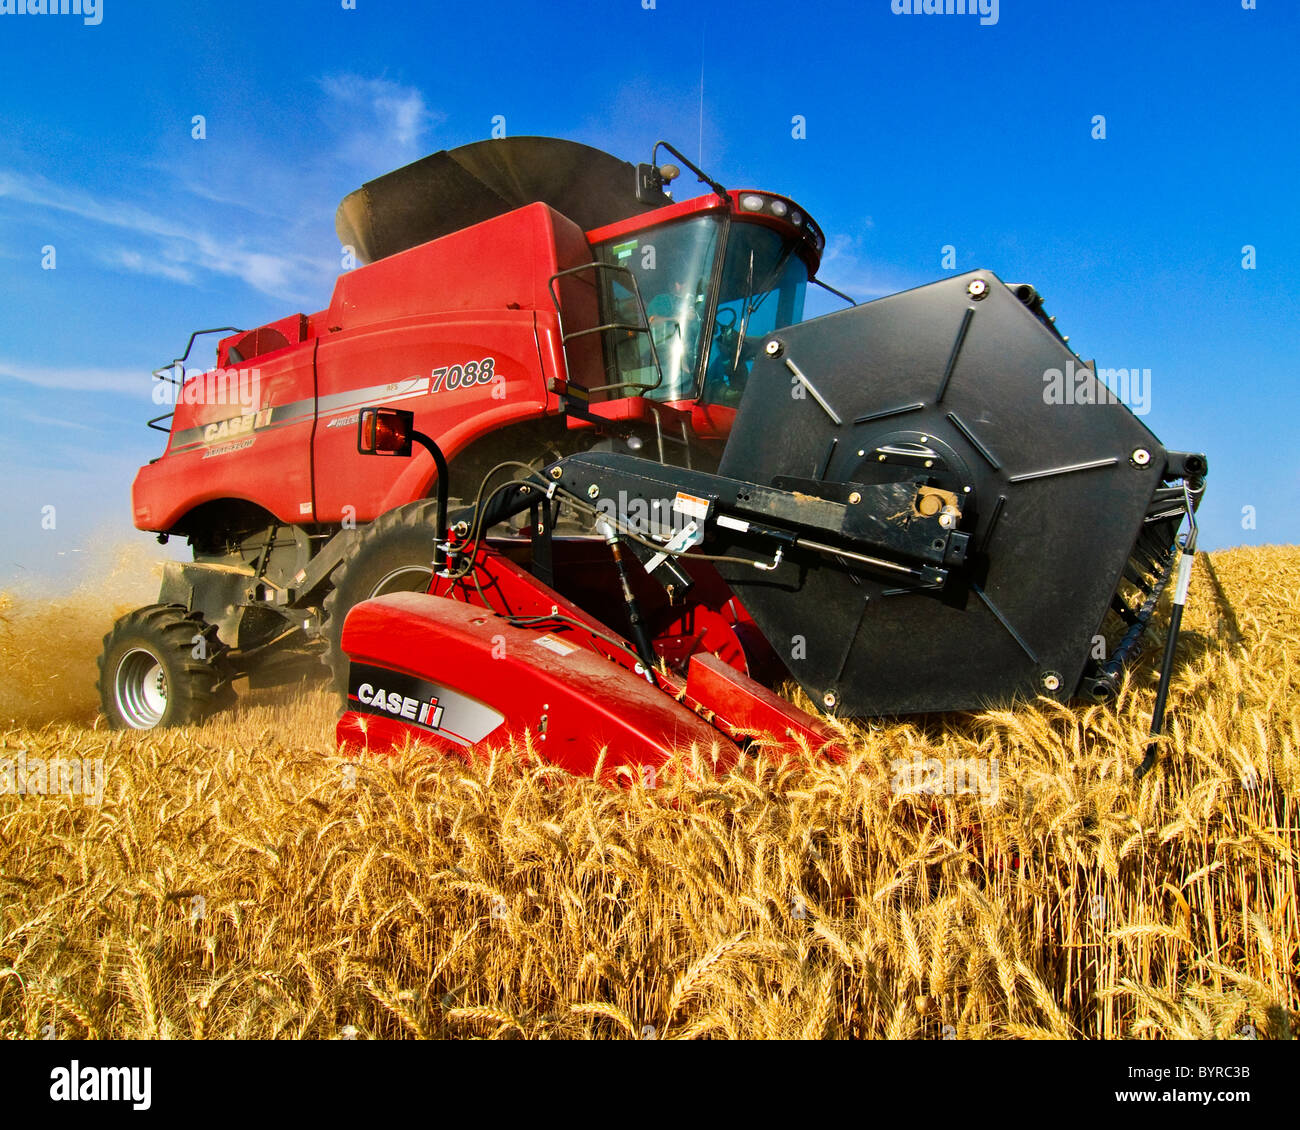 Agriculture - Close up of a Case IH combine harvesting wheat in the Palouse region / near Pullman, Washington, USA. Stock Photo